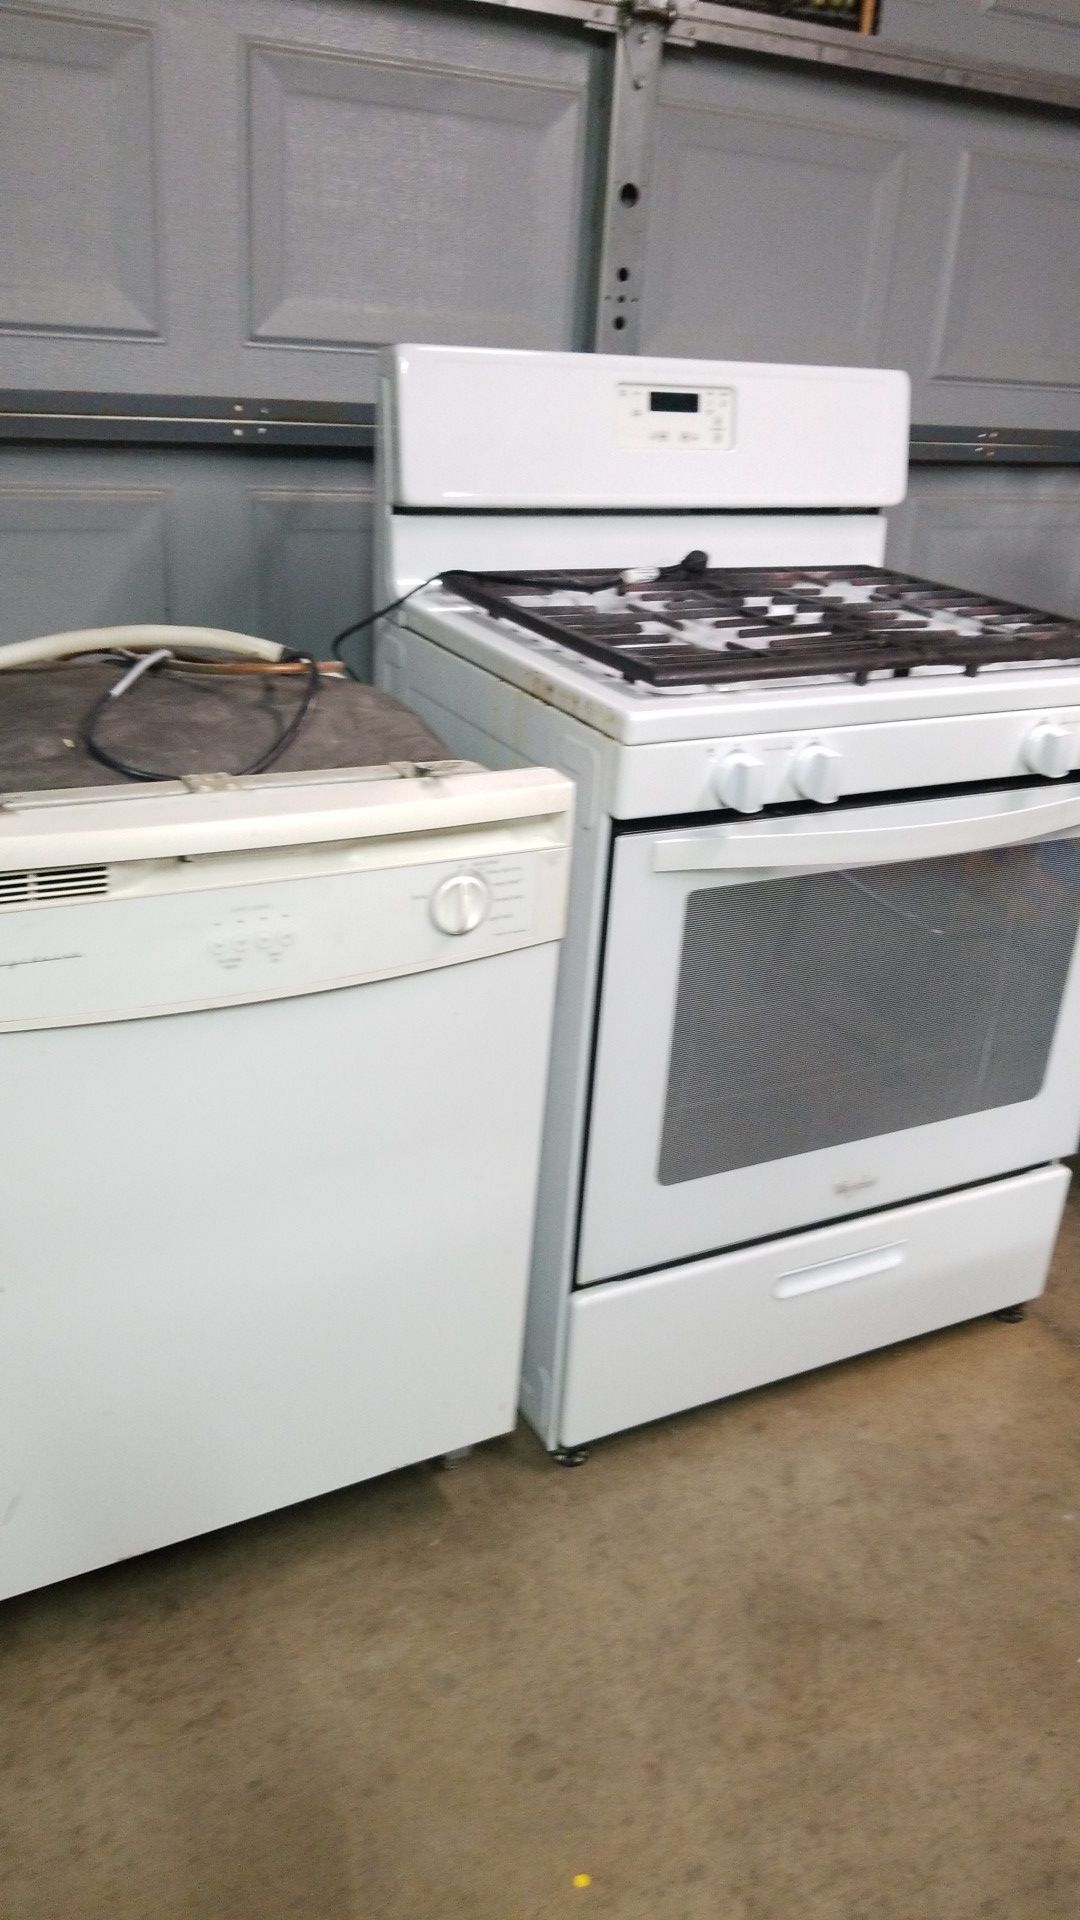 Appliances stove and dishwasher